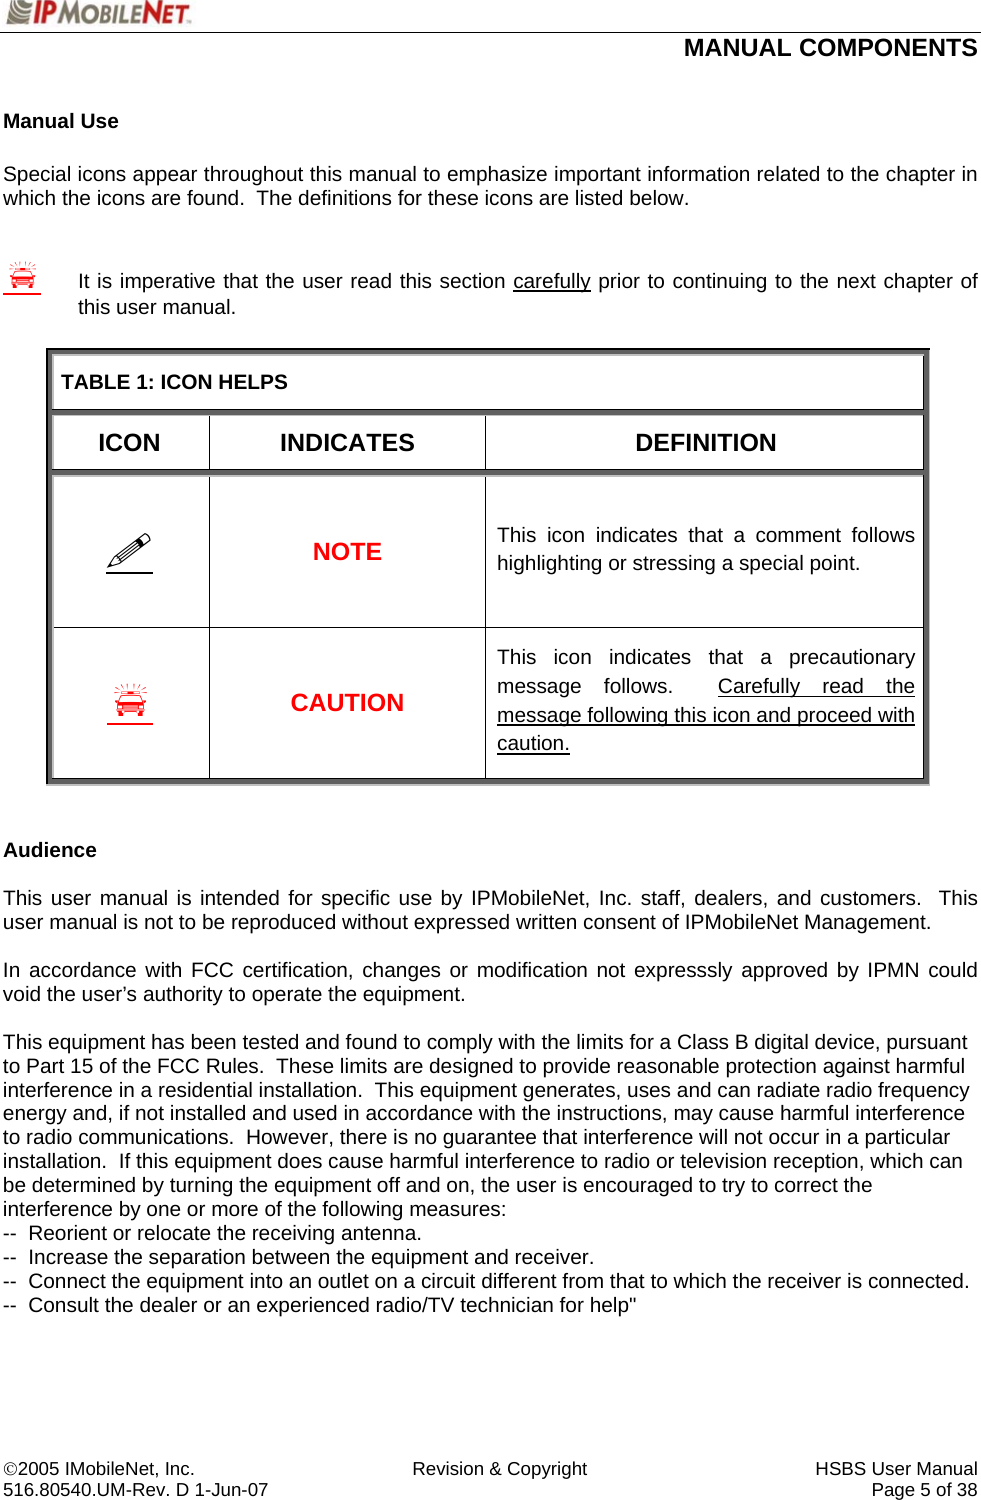  MANUAL COMPONENTS   ©2005 IMobileNet, Inc.  Revision &amp; Copyright  HSBS User Manual 516.80540.UM-Rev. D 1-Jun-07     Page 5 of 38  Manual Use  Special icons appear throughout this manual to emphasize important information related to the chapter in which the icons are found.  The definitions for these icons are listed below.     S  It is imperative that the user read this section carefully prior to continuing to the next chapter of   this user manual.  TABLE 1: ICON HELPS ICON INDICATES  DEFINITION  NOTE This icon indicates that a comment follows highlighting or stressing a special point. S CAUTION This icon indicates that a precautionary message follows.  Carefully read the message following this icon and proceed with caution.   Audience  This user manual is intended for specific use by IPMobileNet, Inc. staff, dealers, and customers.  This user manual is not to be reproduced without expressed written consent of IPMobileNet Management.  In accordance with FCC certification, changes or modification not expresssly approved by IPMN could void the user’s authority to operate the equipment.  This equipment has been tested and found to comply with the limits for a Class B digital device, pursuant to Part 15 of the FCC Rules.  These limits are designed to provide reasonable protection against harmful interference in a residential installation.  This equipment generates, uses and can radiate radio frequency energy and, if not installed and used in accordance with the instructions, may cause harmful interference to radio communications.  However, there is no guarantee that interference will not occur in a particular installation.  If this equipment does cause harmful interference to radio or television reception, which can be determined by turning the equipment off and on, the user is encouraged to try to correct the interference by one or more of the following measures: --  Reorient or relocate the receiving antenna. --  Increase the separation between the equipment and receiver. --  Connect the equipment into an outlet on a circuit different from that to which the receiver is connected. --  Consult the dealer or an experienced radio/TV technician for help&quot;     